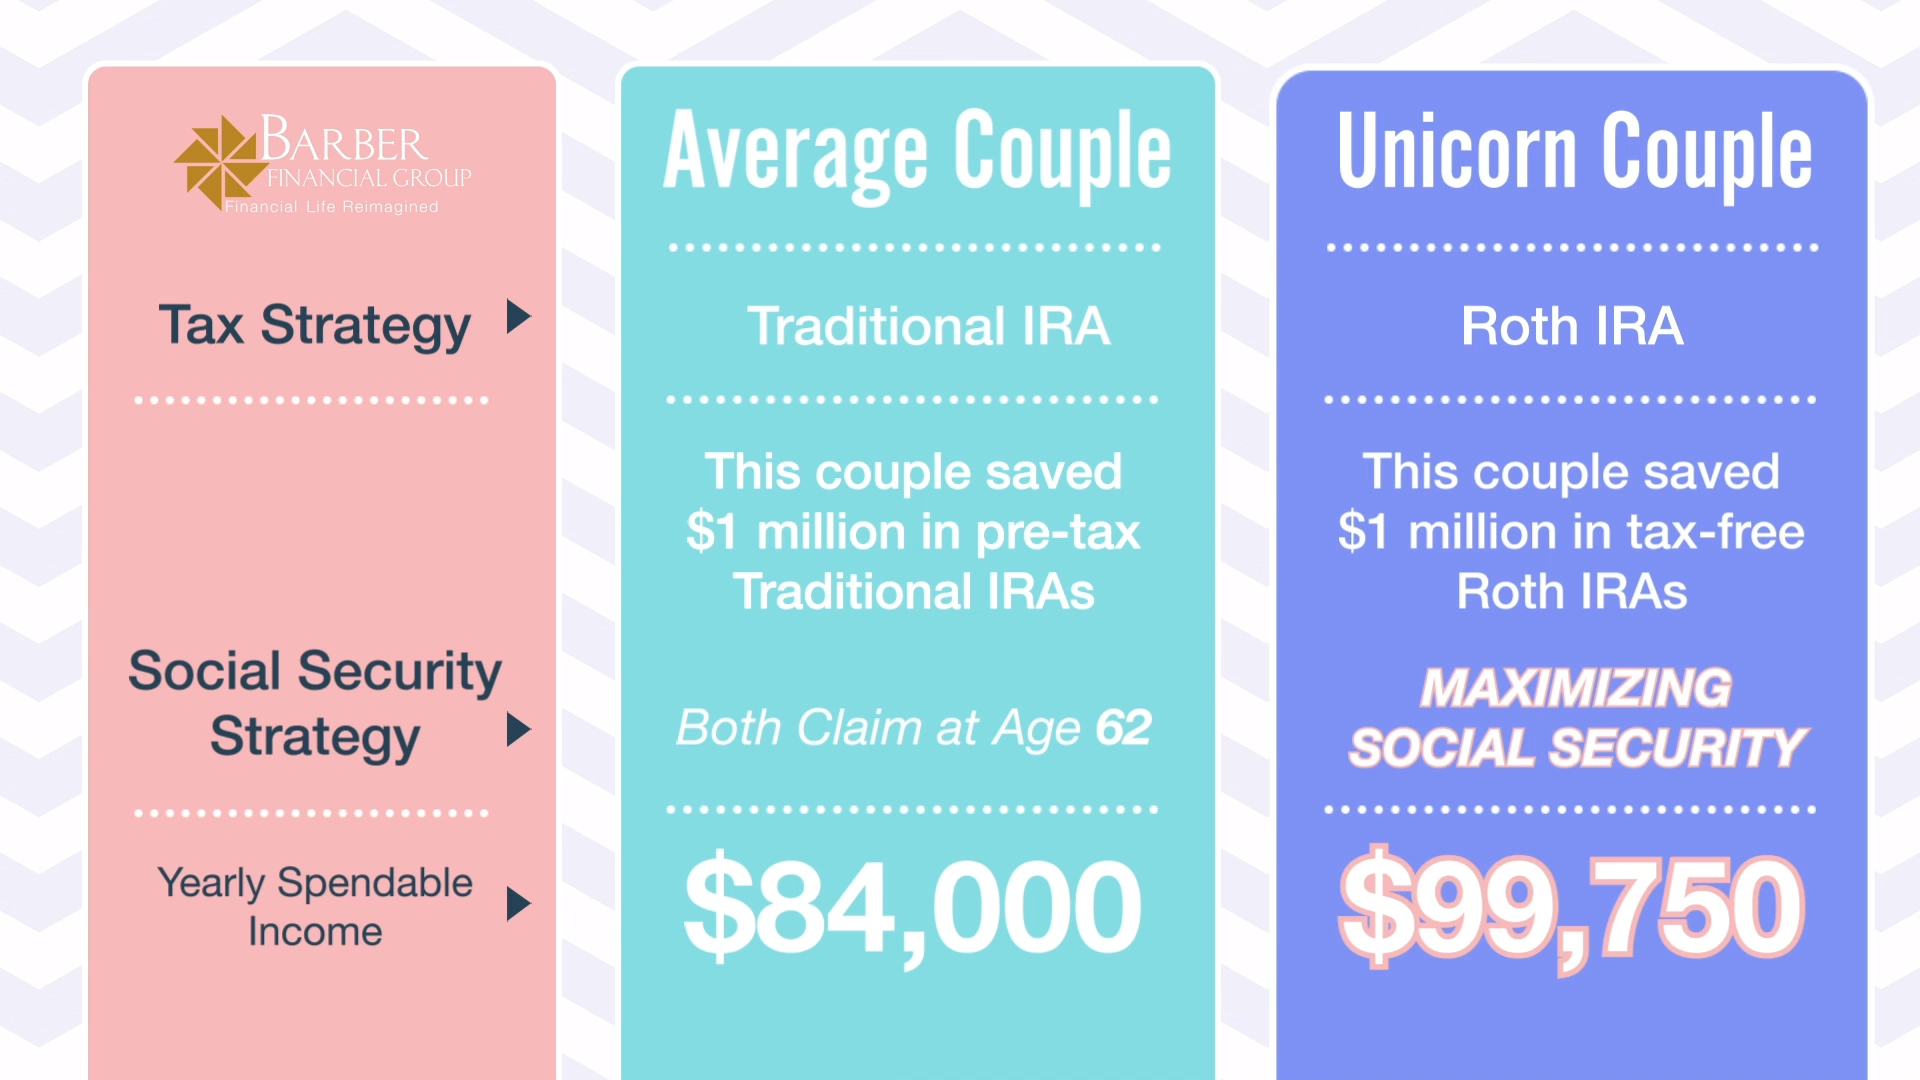 Retiring with $1 Million - Unicorn Couples Yearly Income Max SS